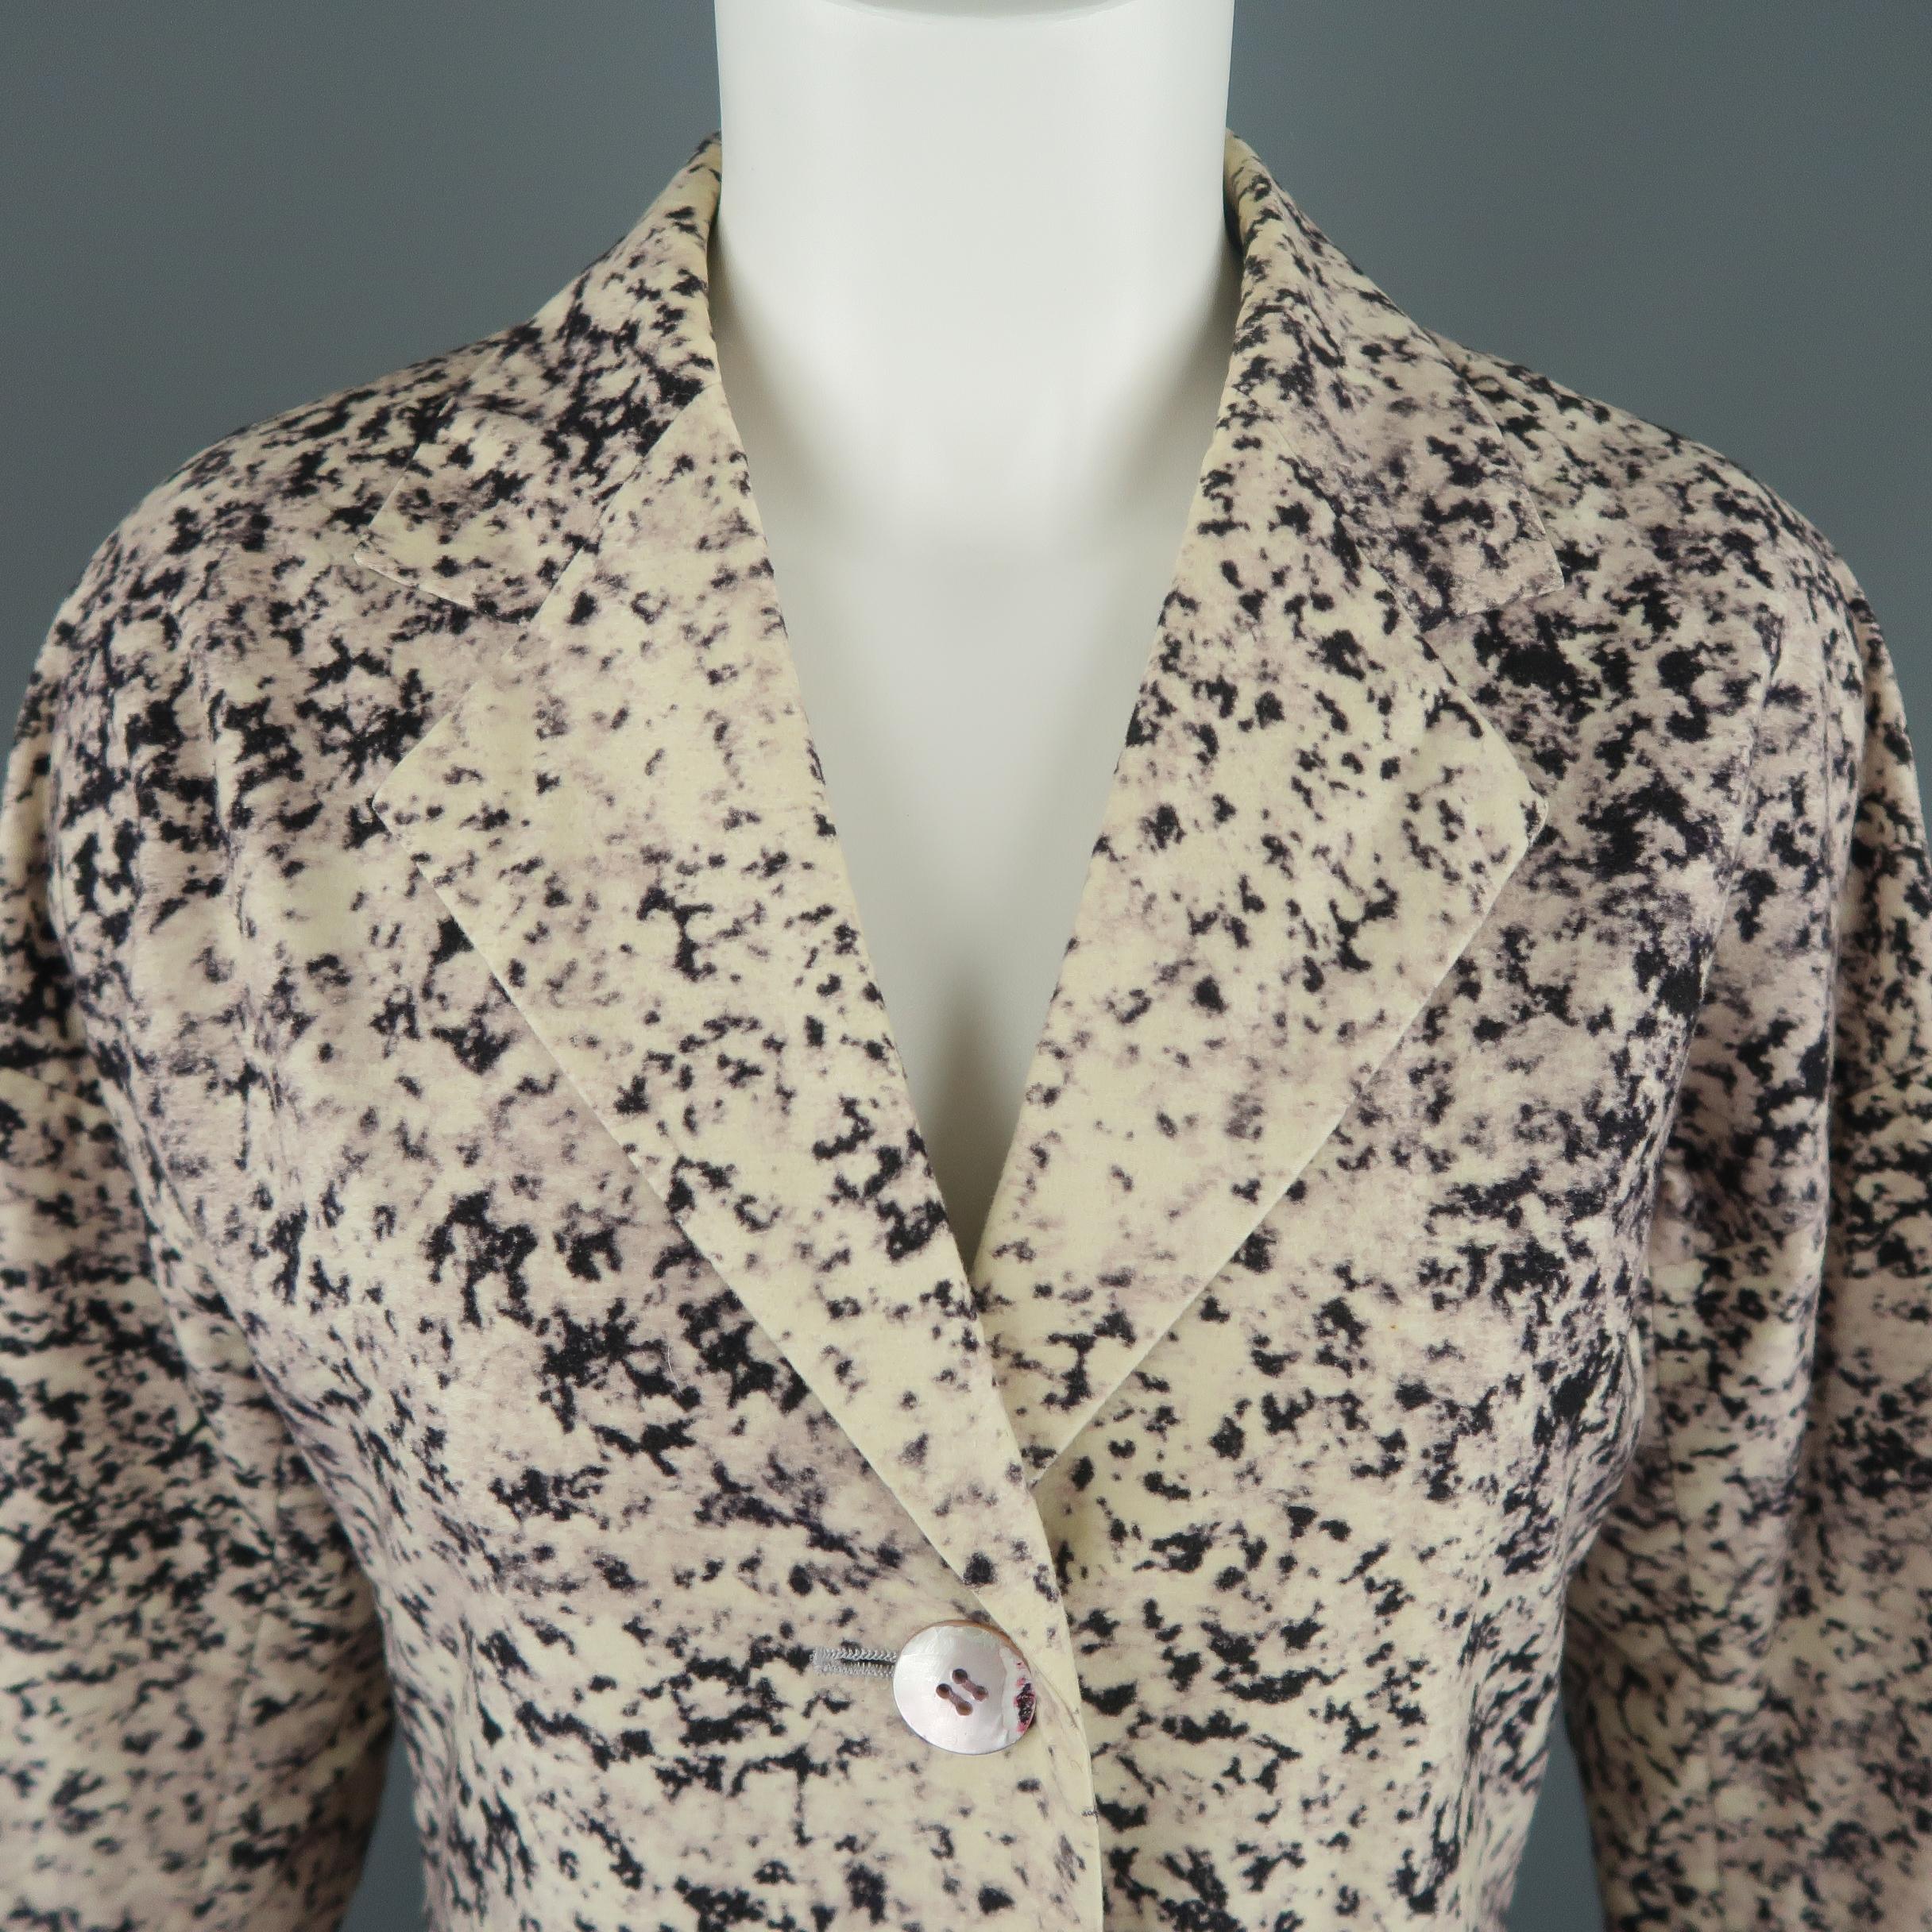 Vintage ISSEY MIYAKE jacket comes in beige purple and black marble print felt with a notch lapel, two button front, slit pockets, drop shoulder, and nylon liner. Made in Italy.
 
Very Good Pre-Owned Condition.
Marked: (no size)
 
Measurements:
